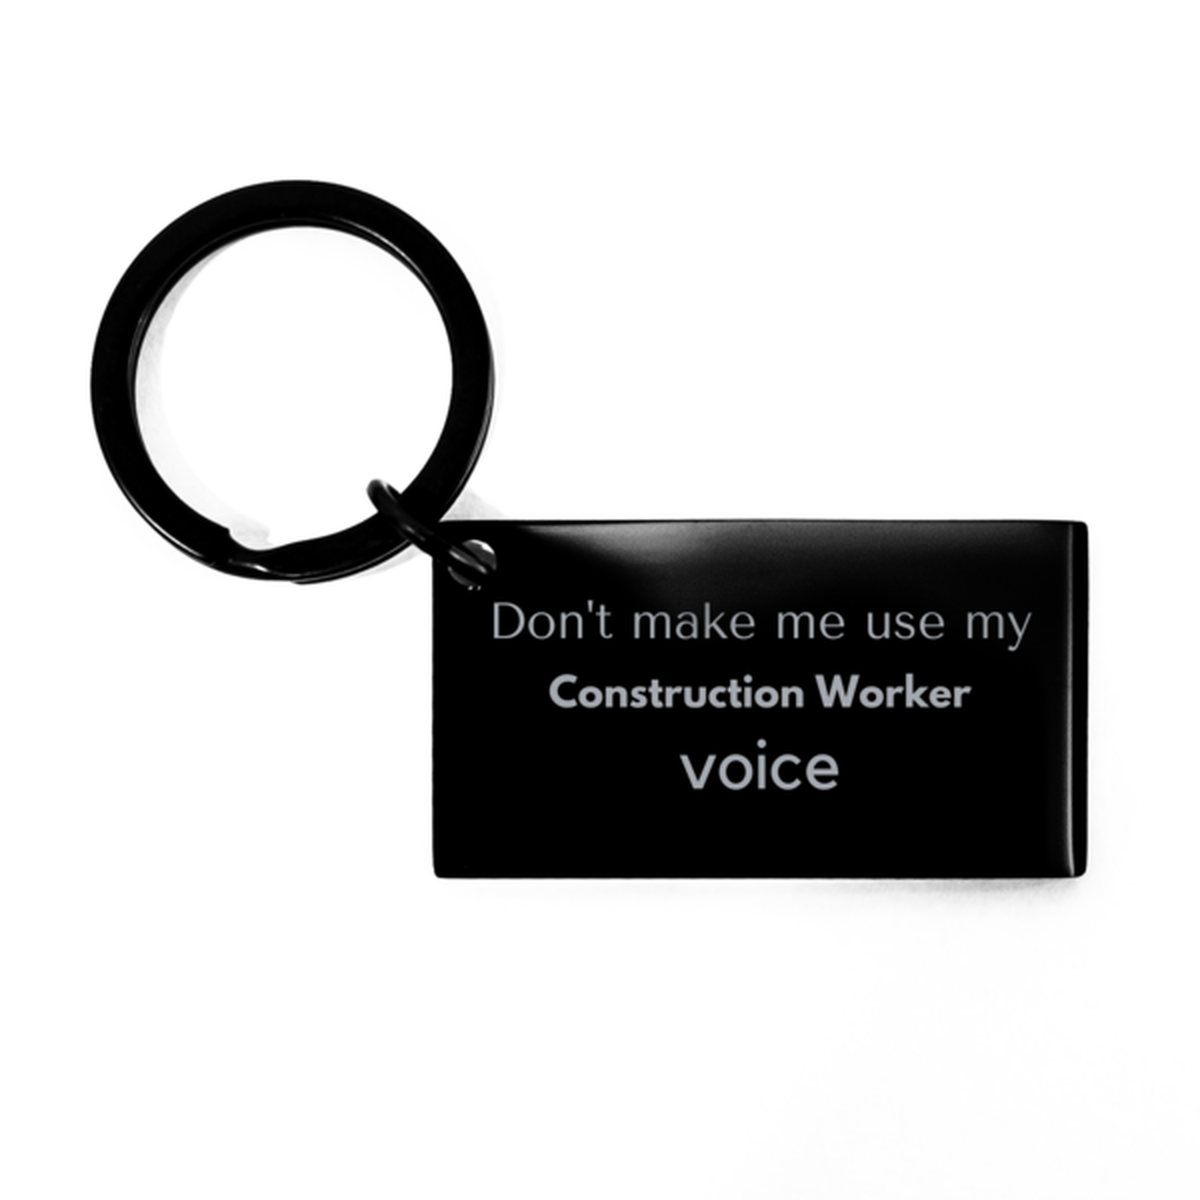 Don't make me use my Construction Worker voice, Sarcasm Construction Worker Gifts, Christmas Construction Worker Keychain Birthday Unique Gifts For Construction Worker Coworkers, Men, Women, Colleague, Friends